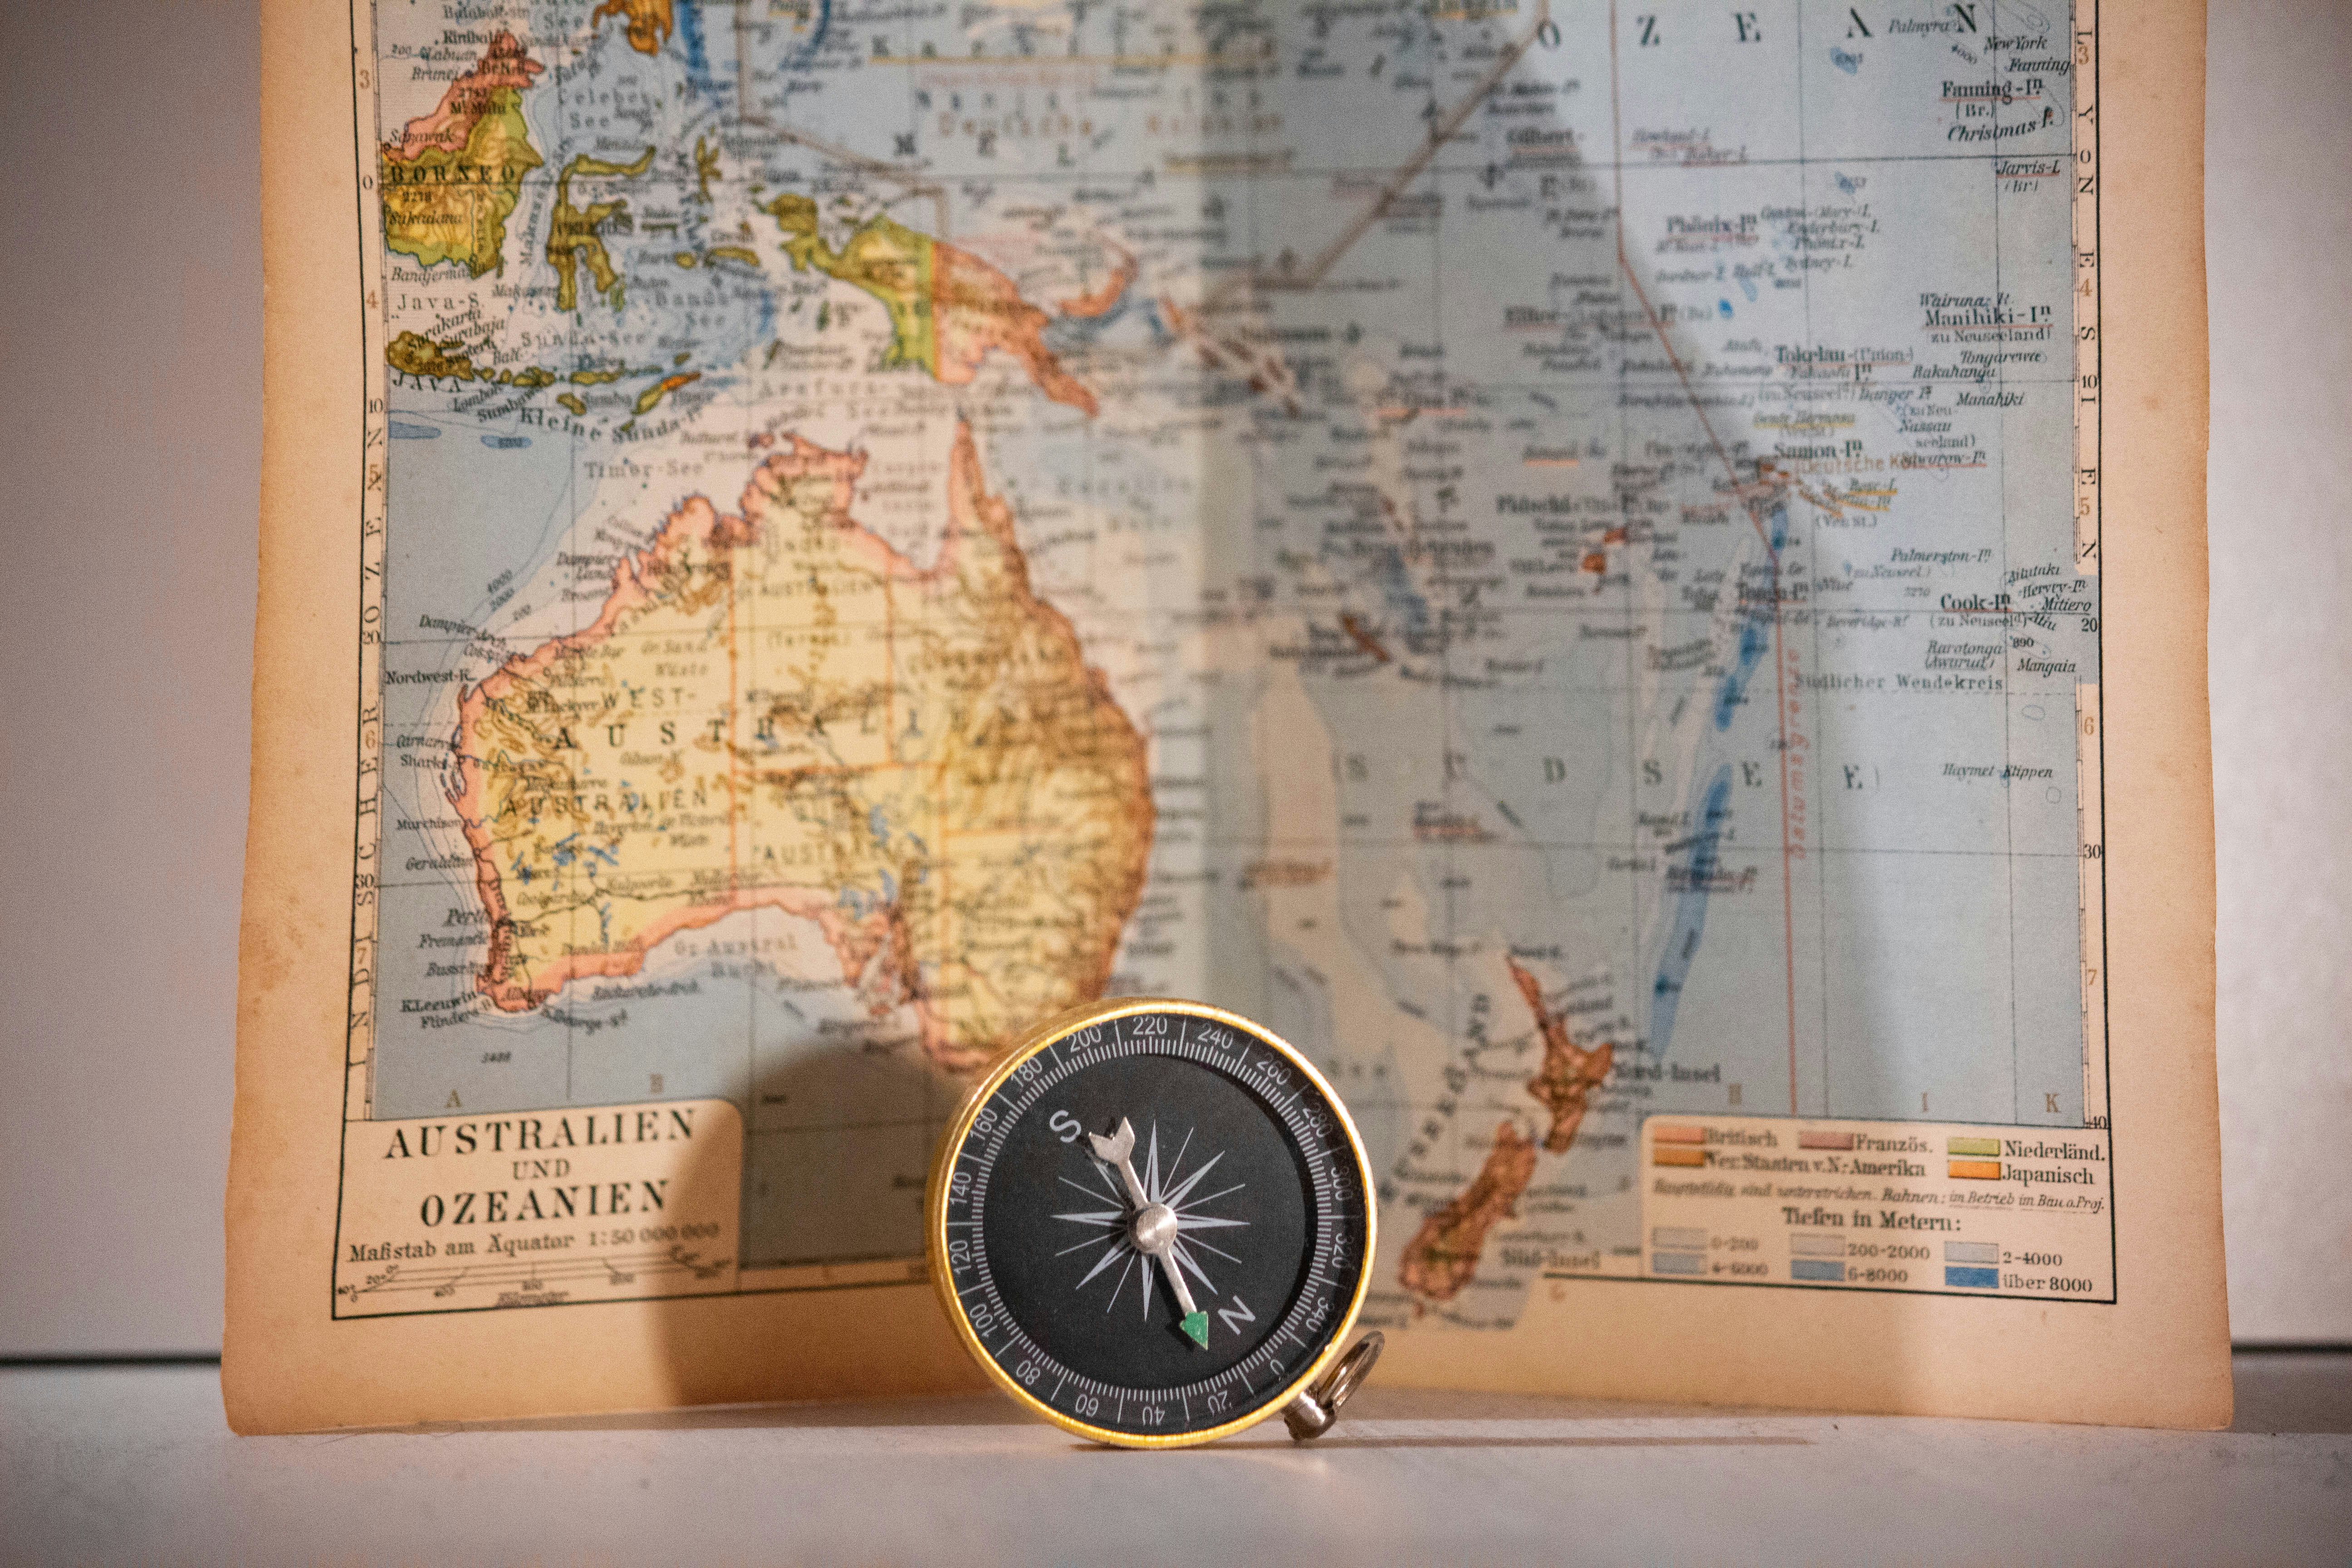 One of my own compass with an old map I bought at a vintage store of Australia and New Zealand.